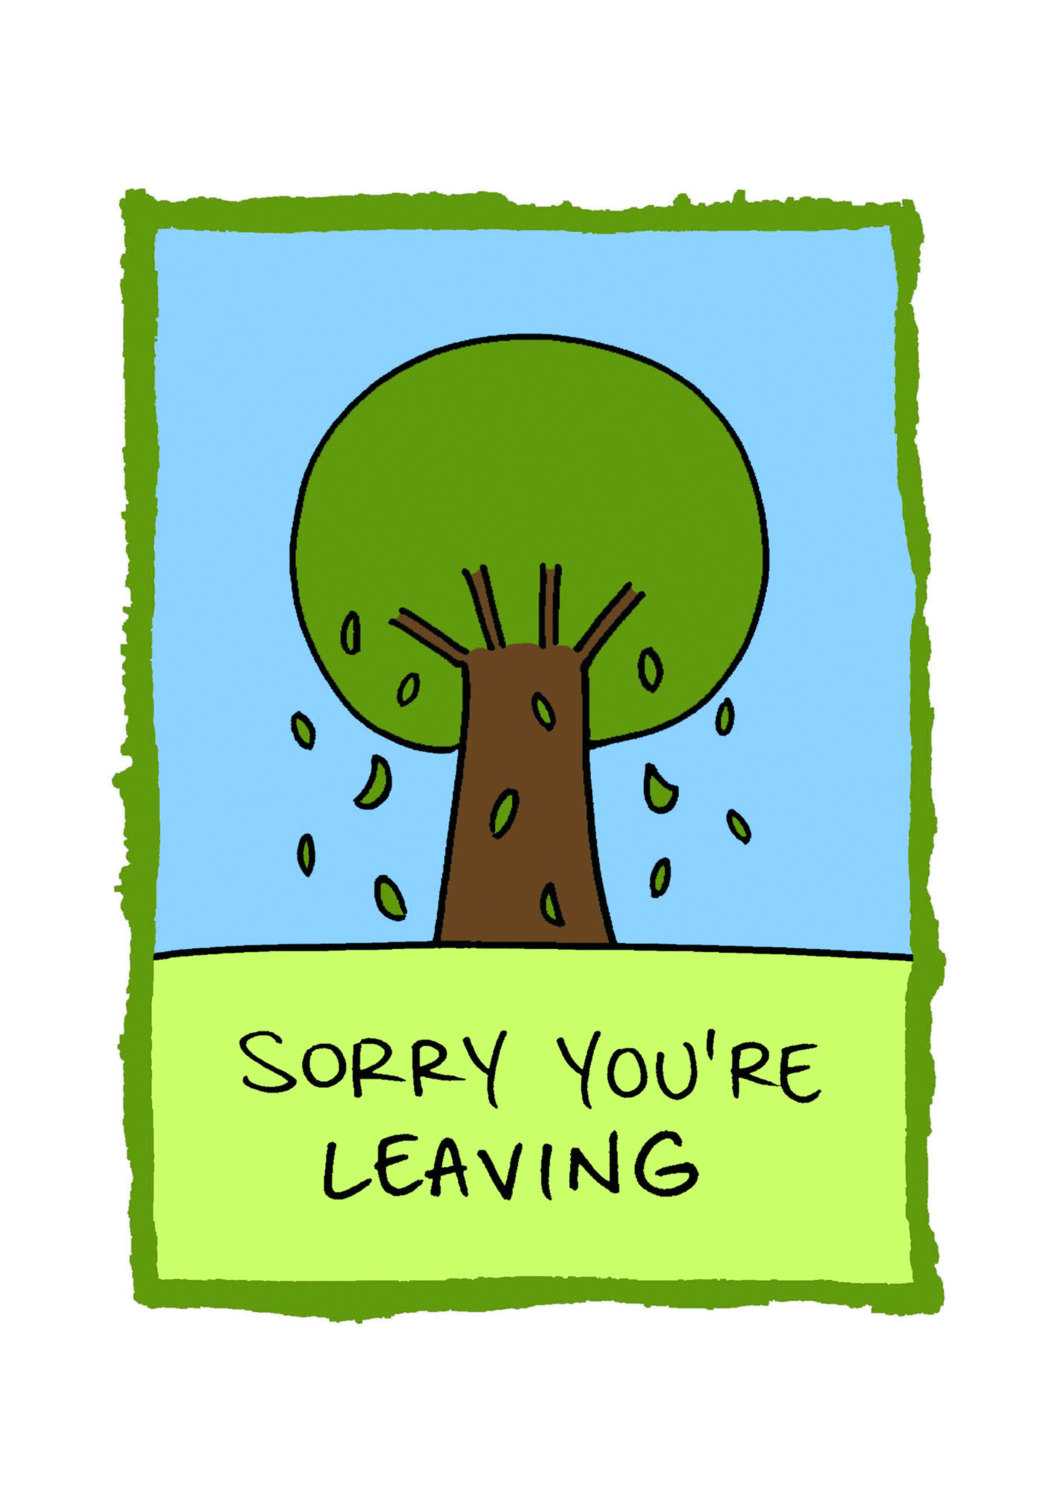 28+ [ Sorry You Re Leaving Card Template ] | Sorry You Re Within Sorry You Re Leaving Card Template